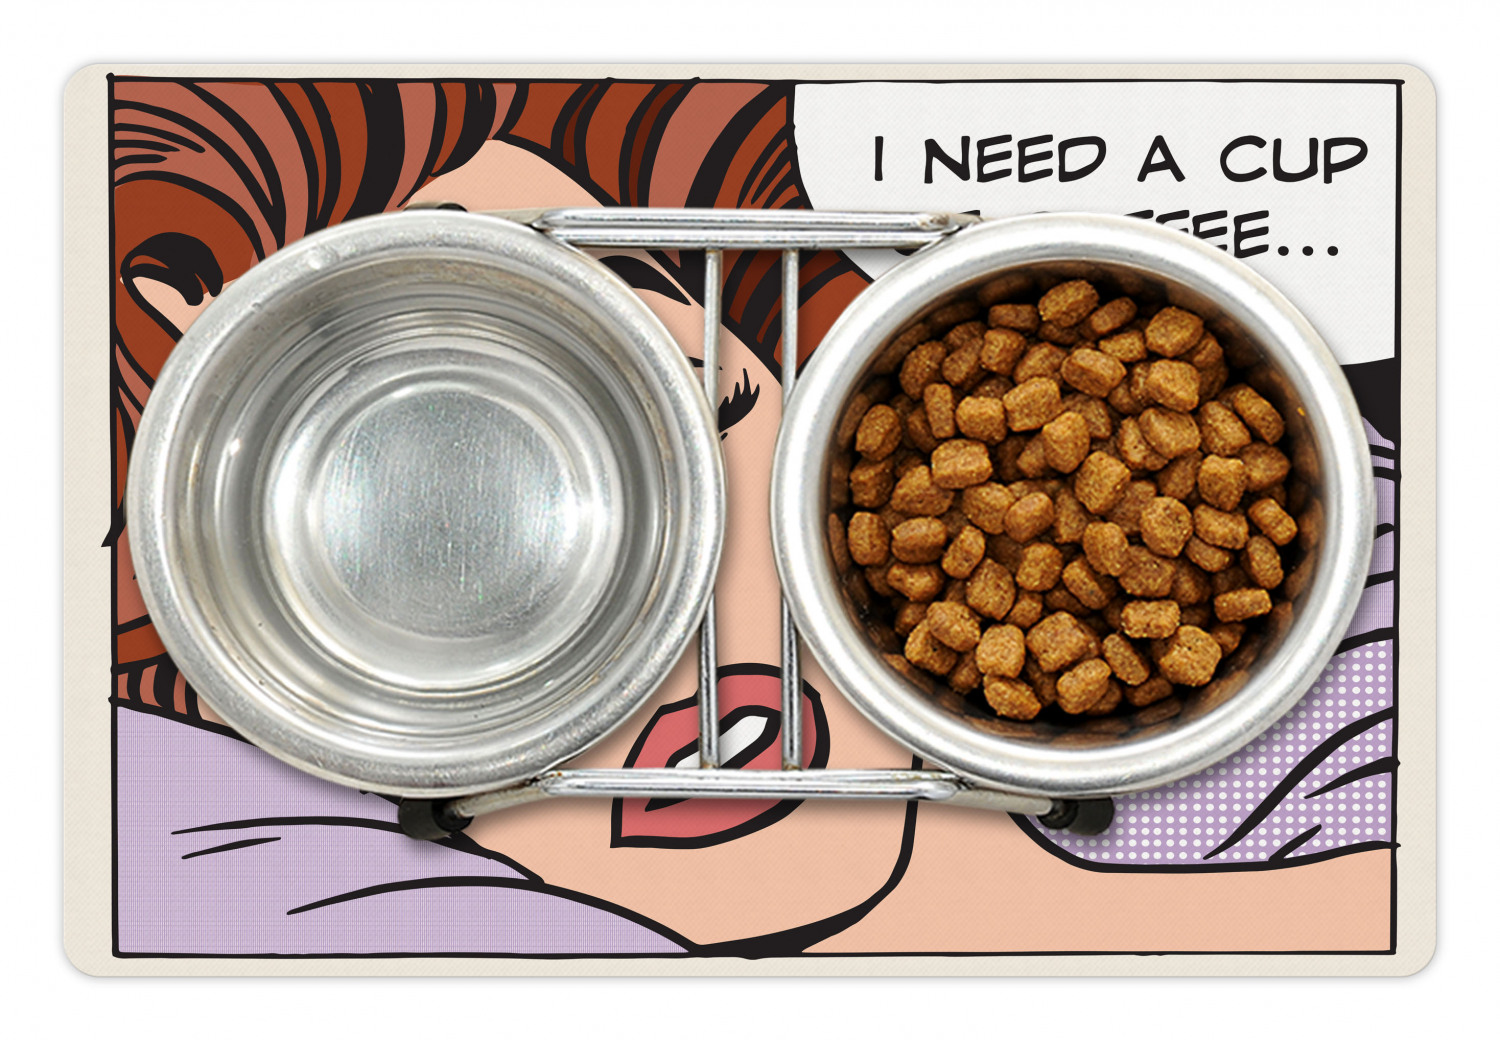 Retro Pet Mat for Food and Water, Pop Art Comic Book Style Beauty Sleep Girl Says I Need a Cup of Coffee Speech Bubble, Non-Slip Rubber Mat for Dogs and Cats, 18" X 12", by Ambesonne - image 1 of 1